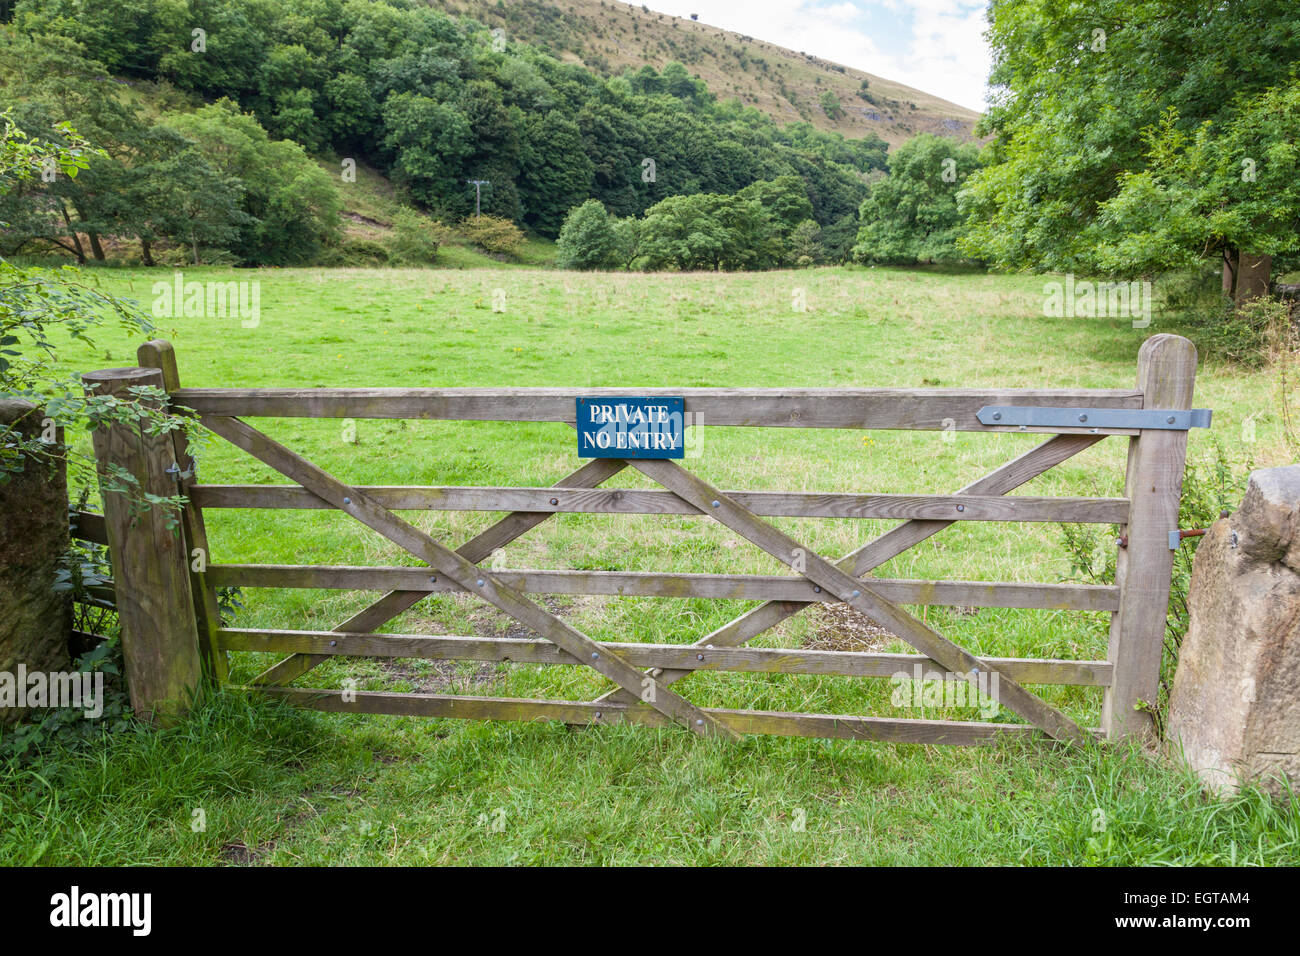 Farm gate with a Private No Entry sign prohibiting access to the land, Derbyshire, Peak District National Park, England, UK Stock Photo